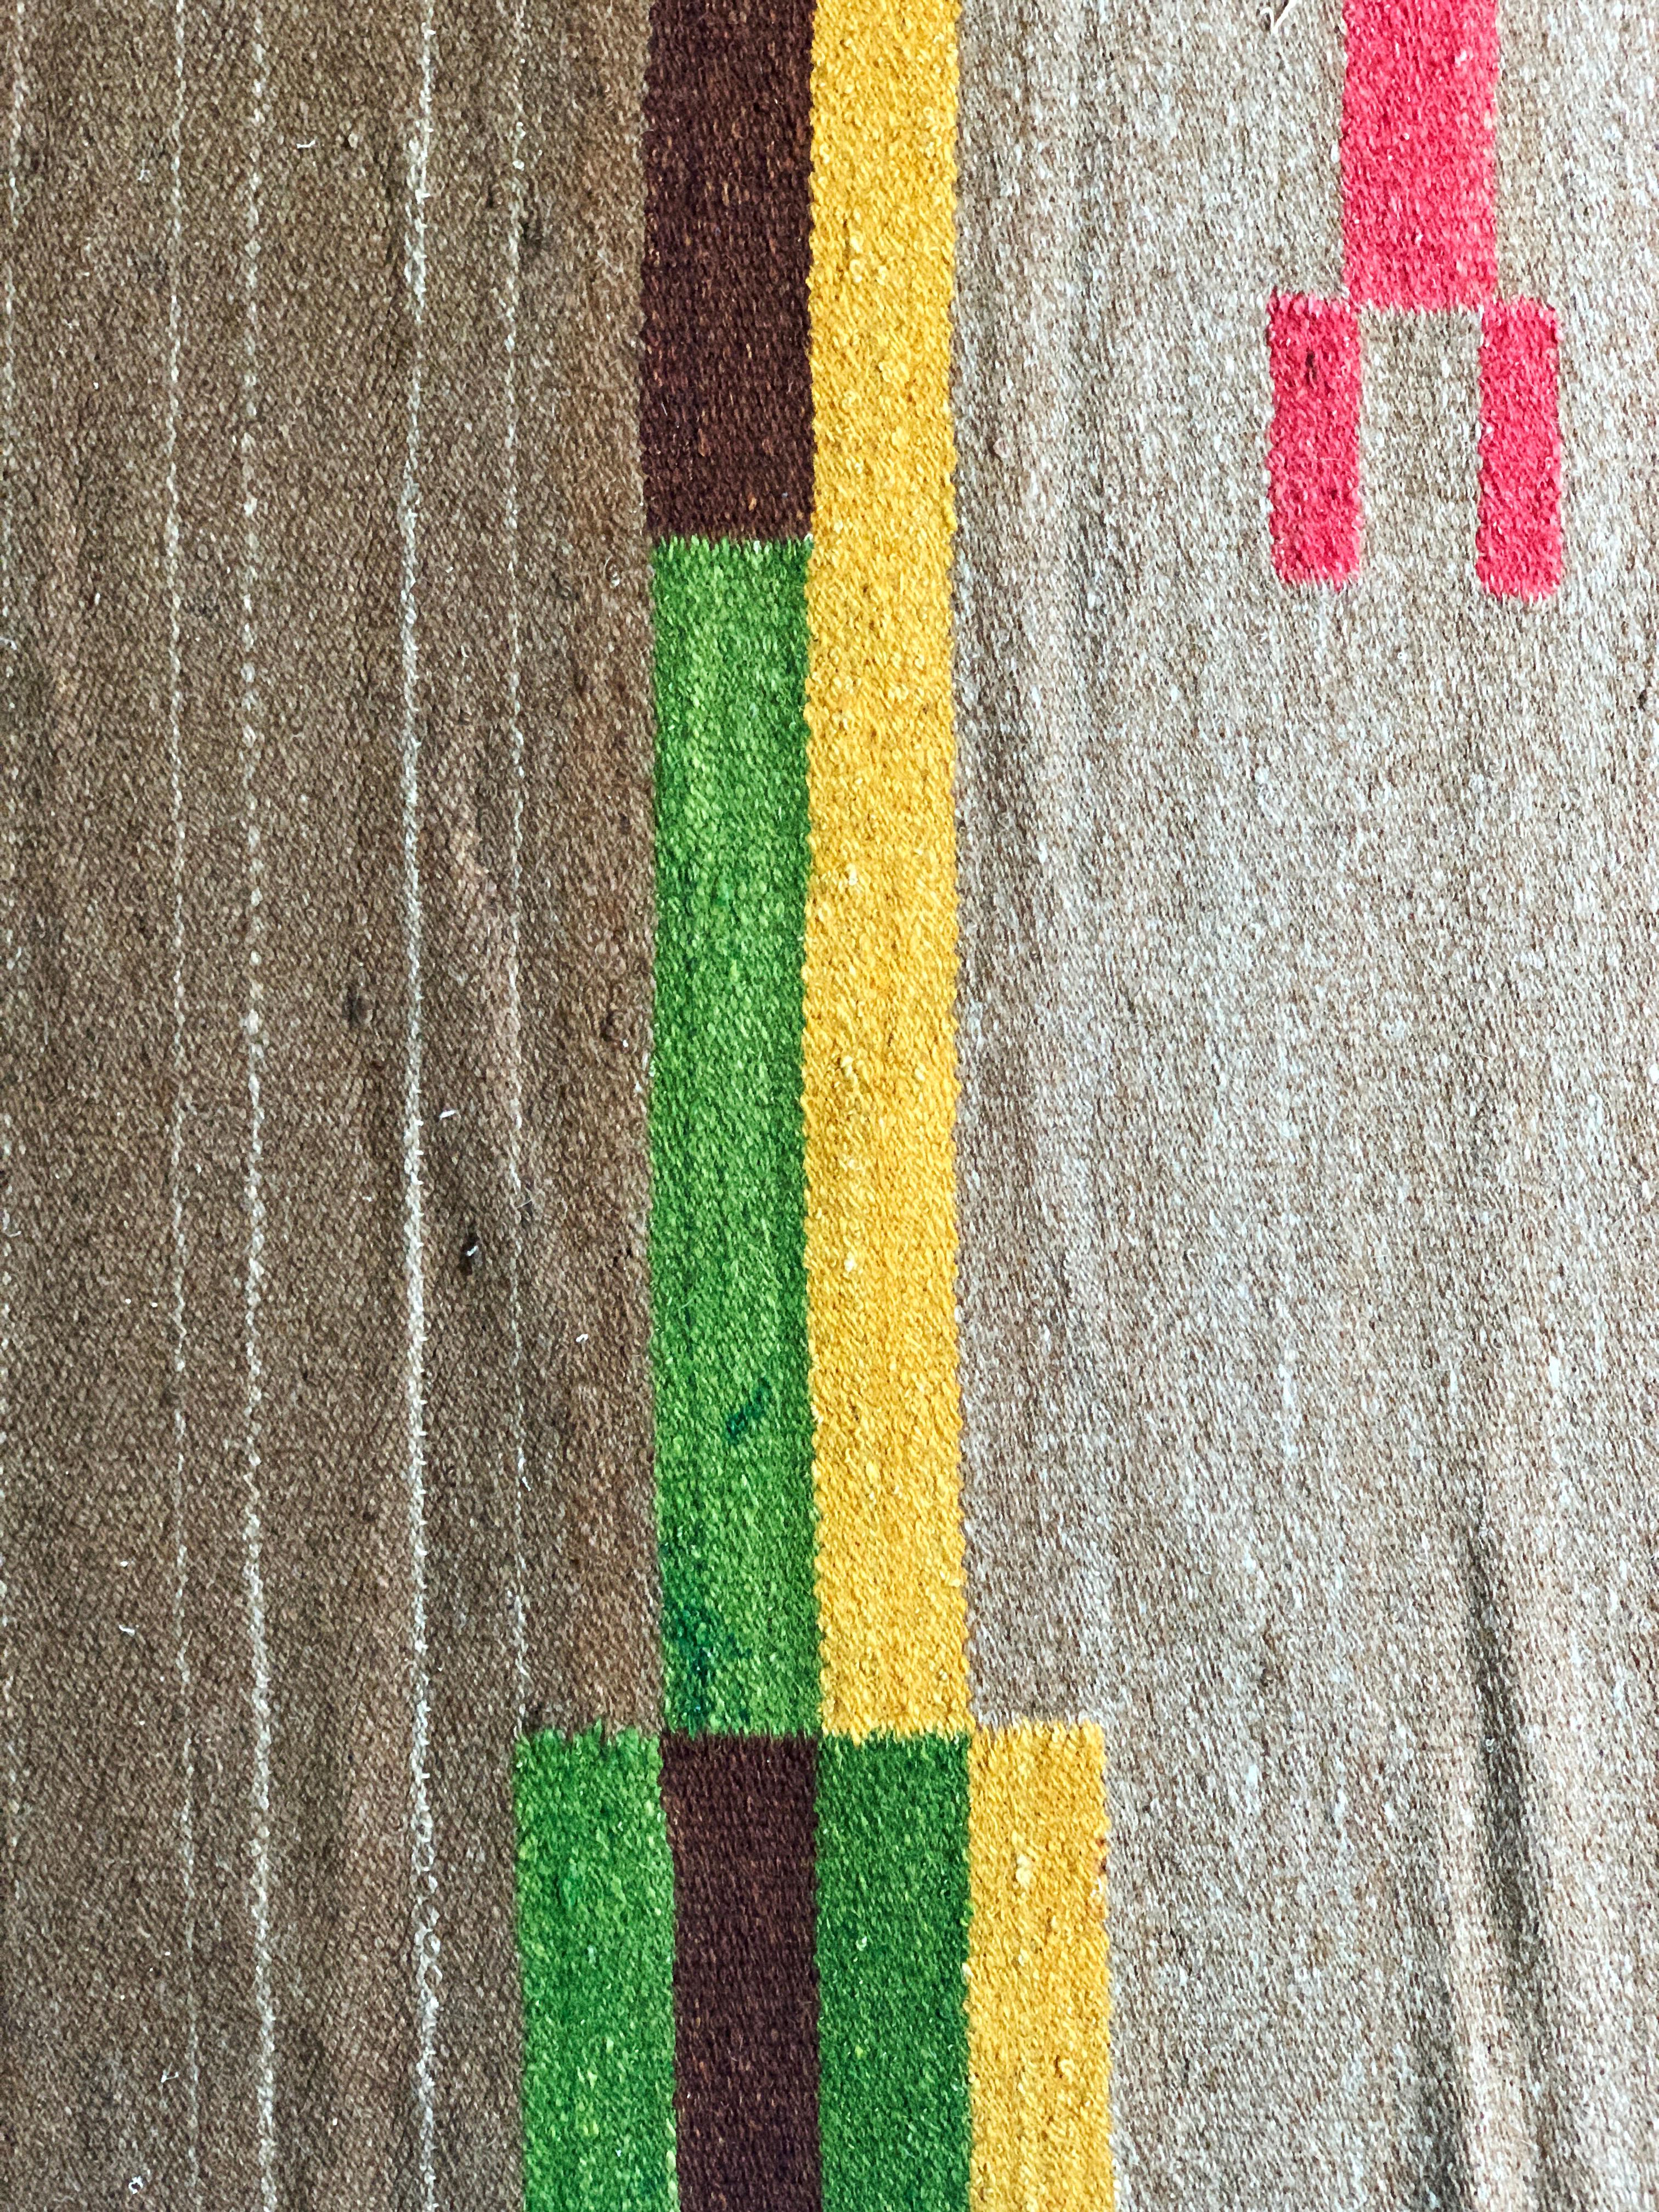 Woven Functionalist Finnish Rug 1930s 310x220cm For Sale